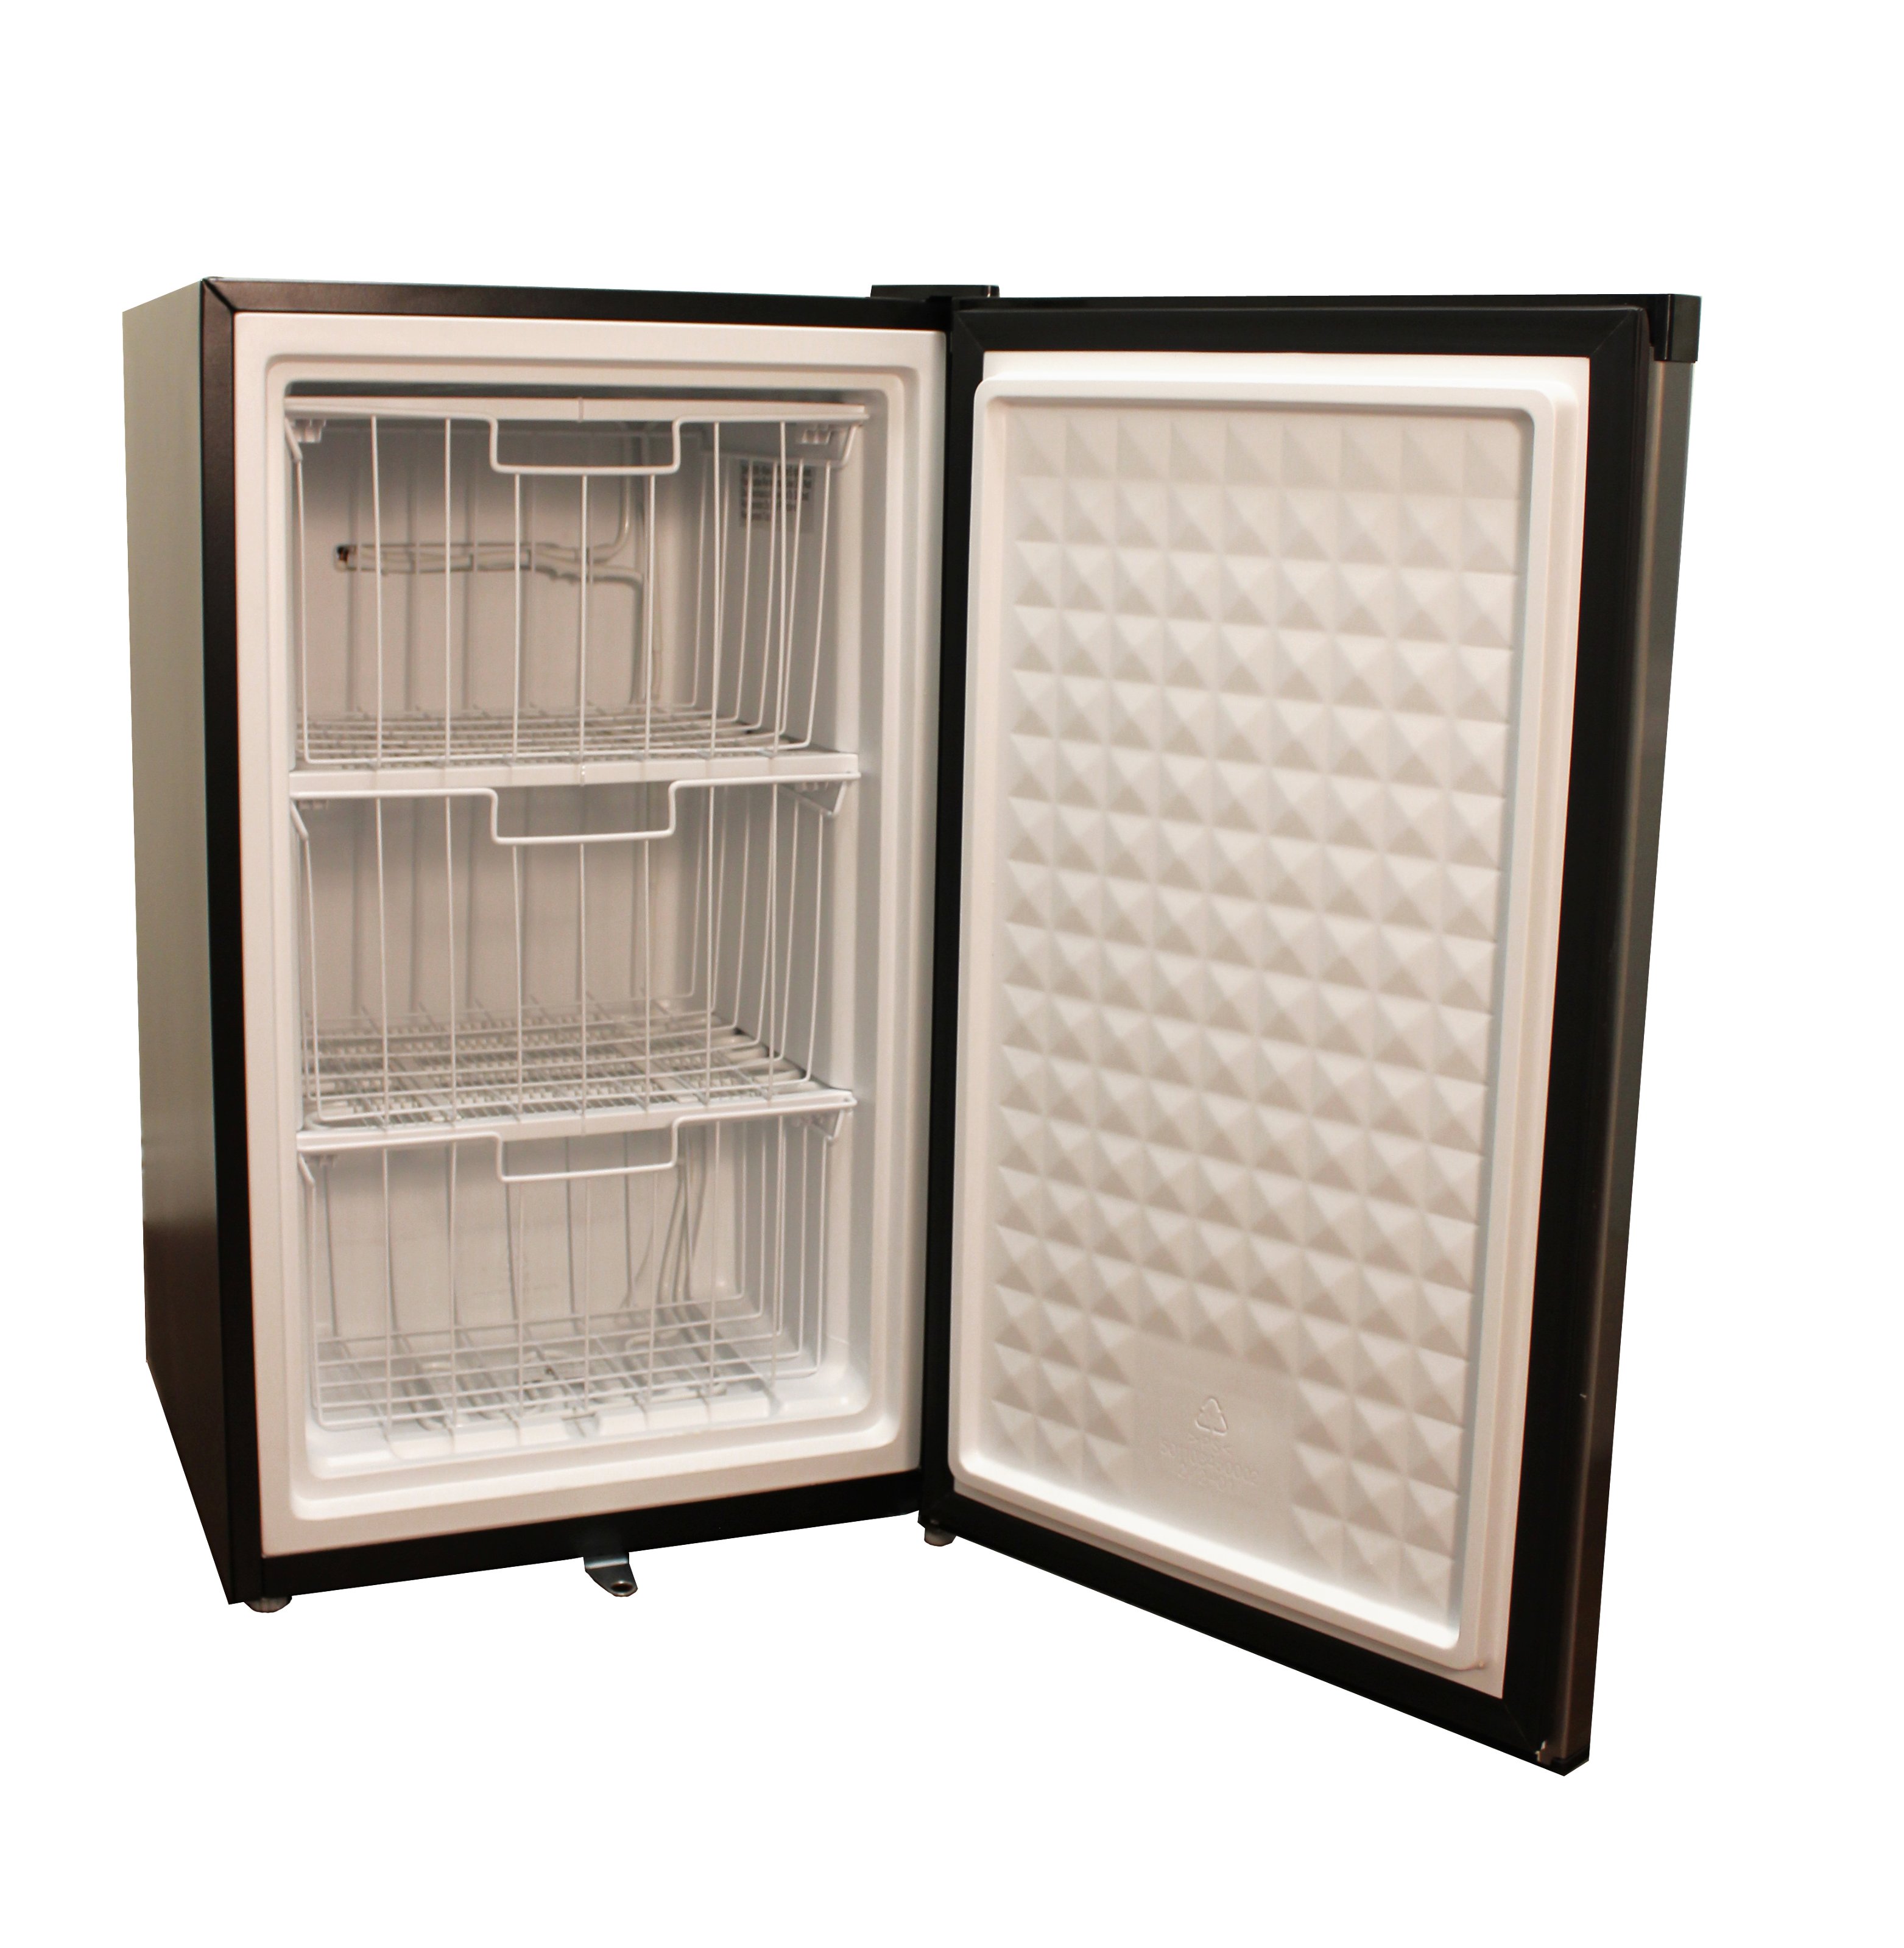 Angle View: SPT - 3.0 Cu. Ft. Upright Freezer - Stainless Steel